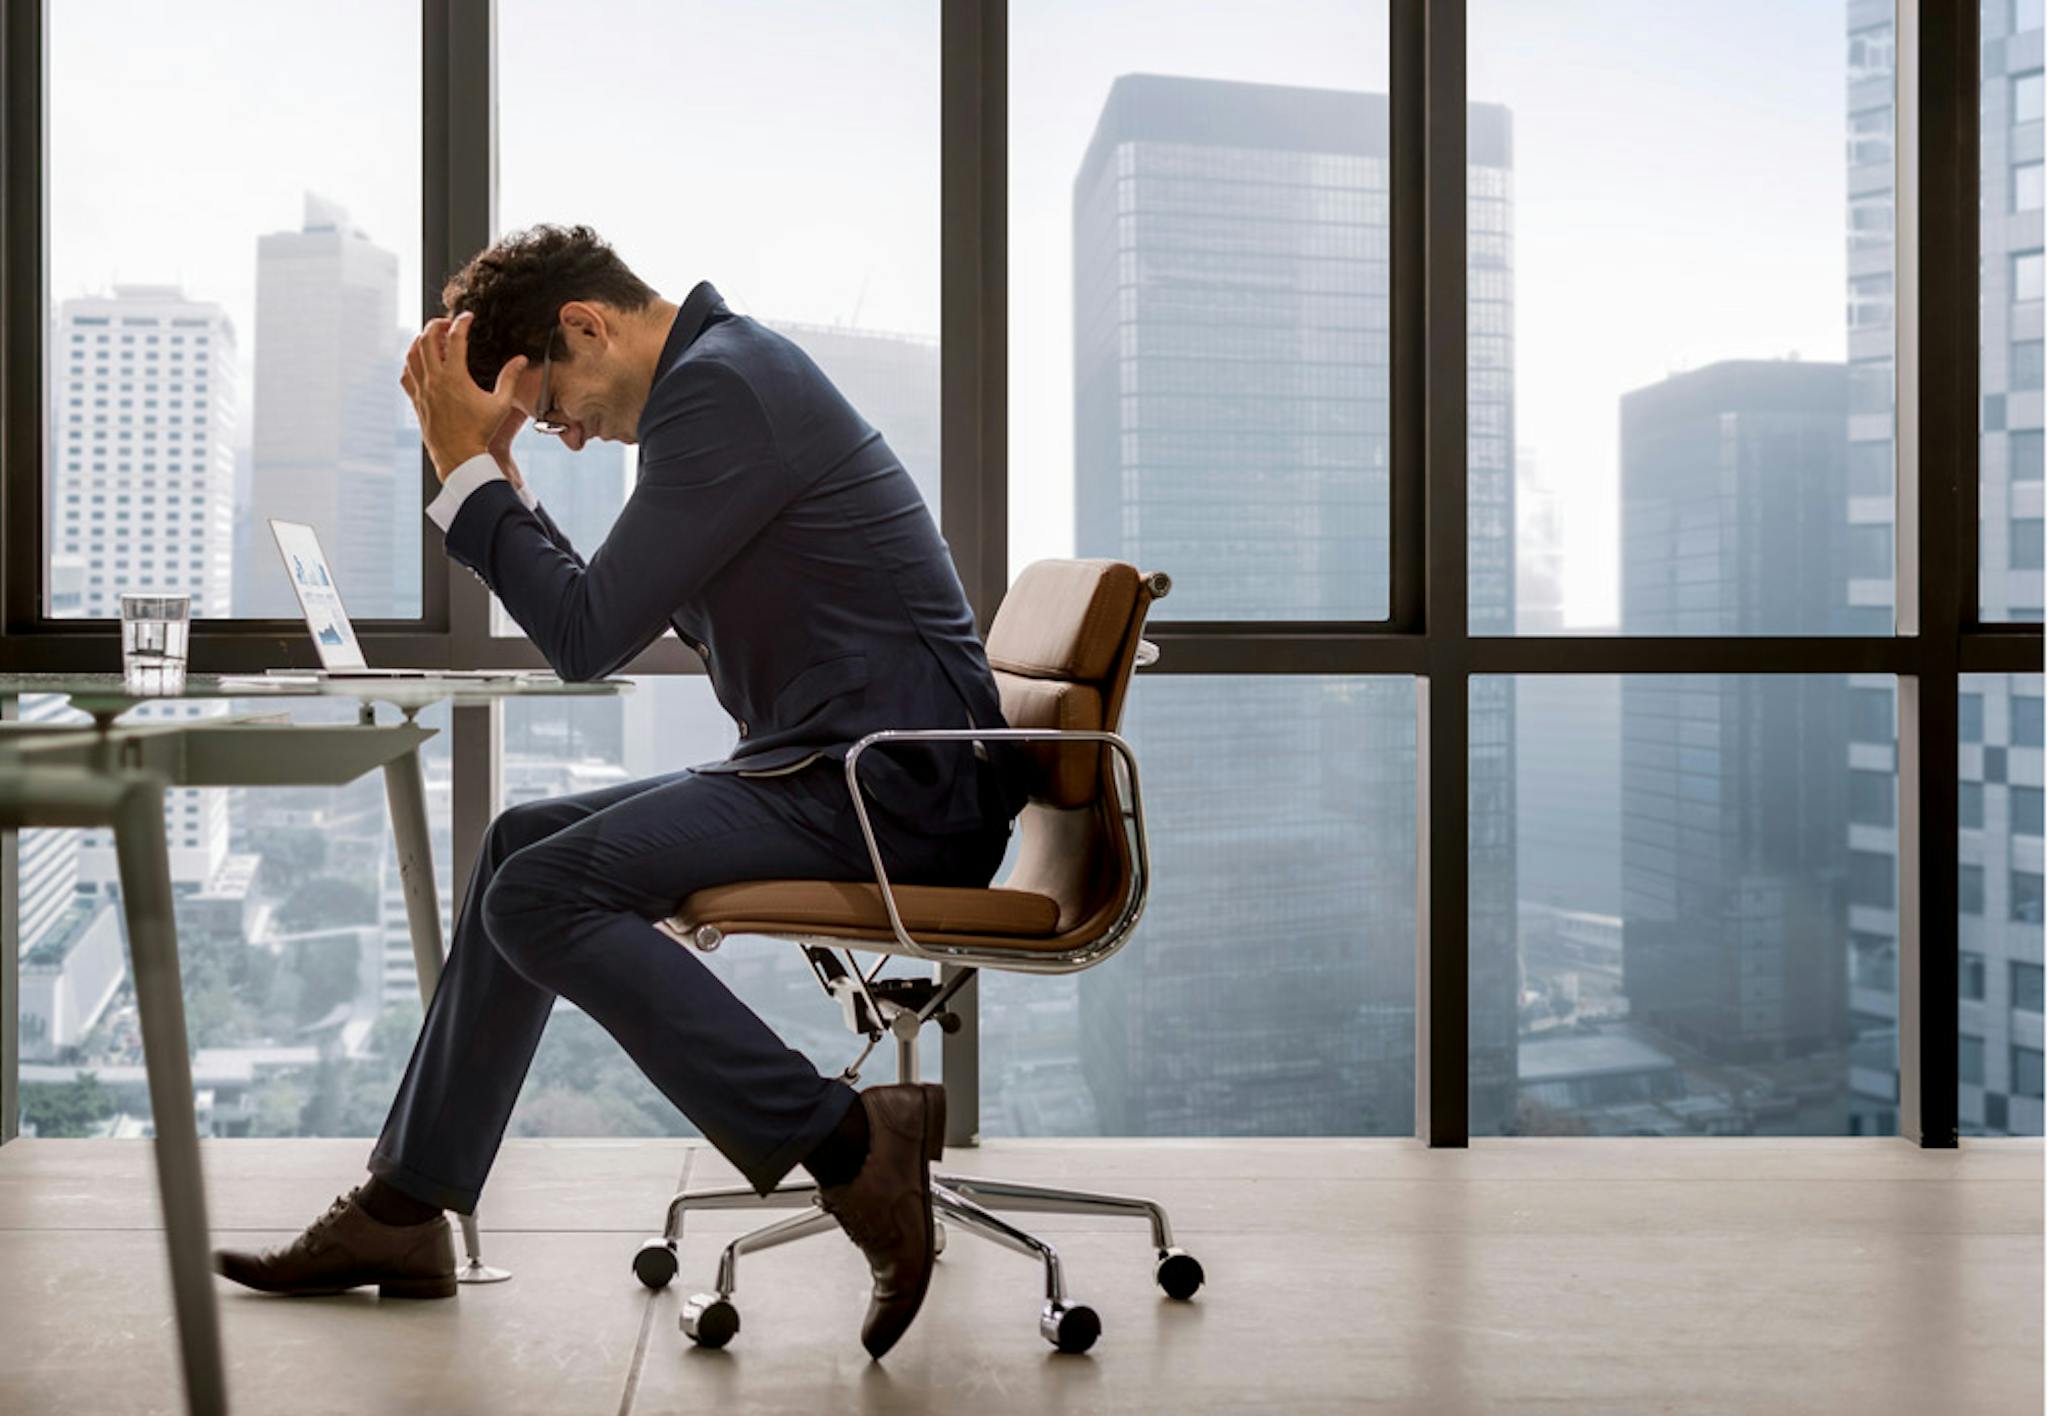 A frustrated marketer sitting at a desk